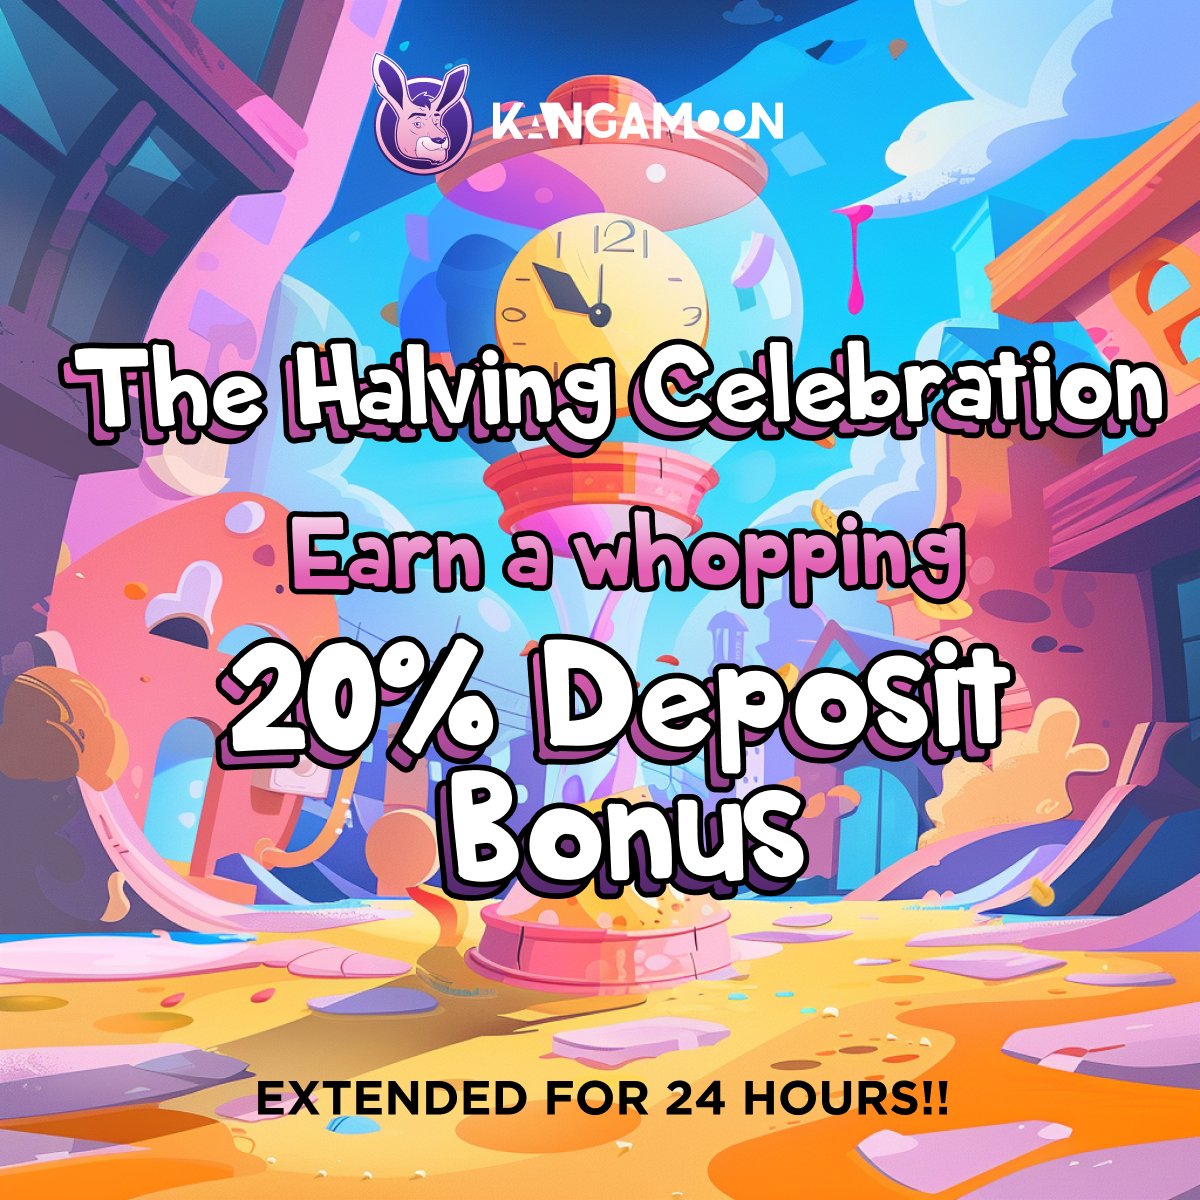 💥 Great news, #Mooners! 💥

The Halving Celebration just got even more thrilling—due to an overwhelming response and to ensure all pending transactions are supported, we’ve extended the 20% Deposit Bonus for an extra 24 hours! 🥳

Whether you’re wrapping up or just diving in,